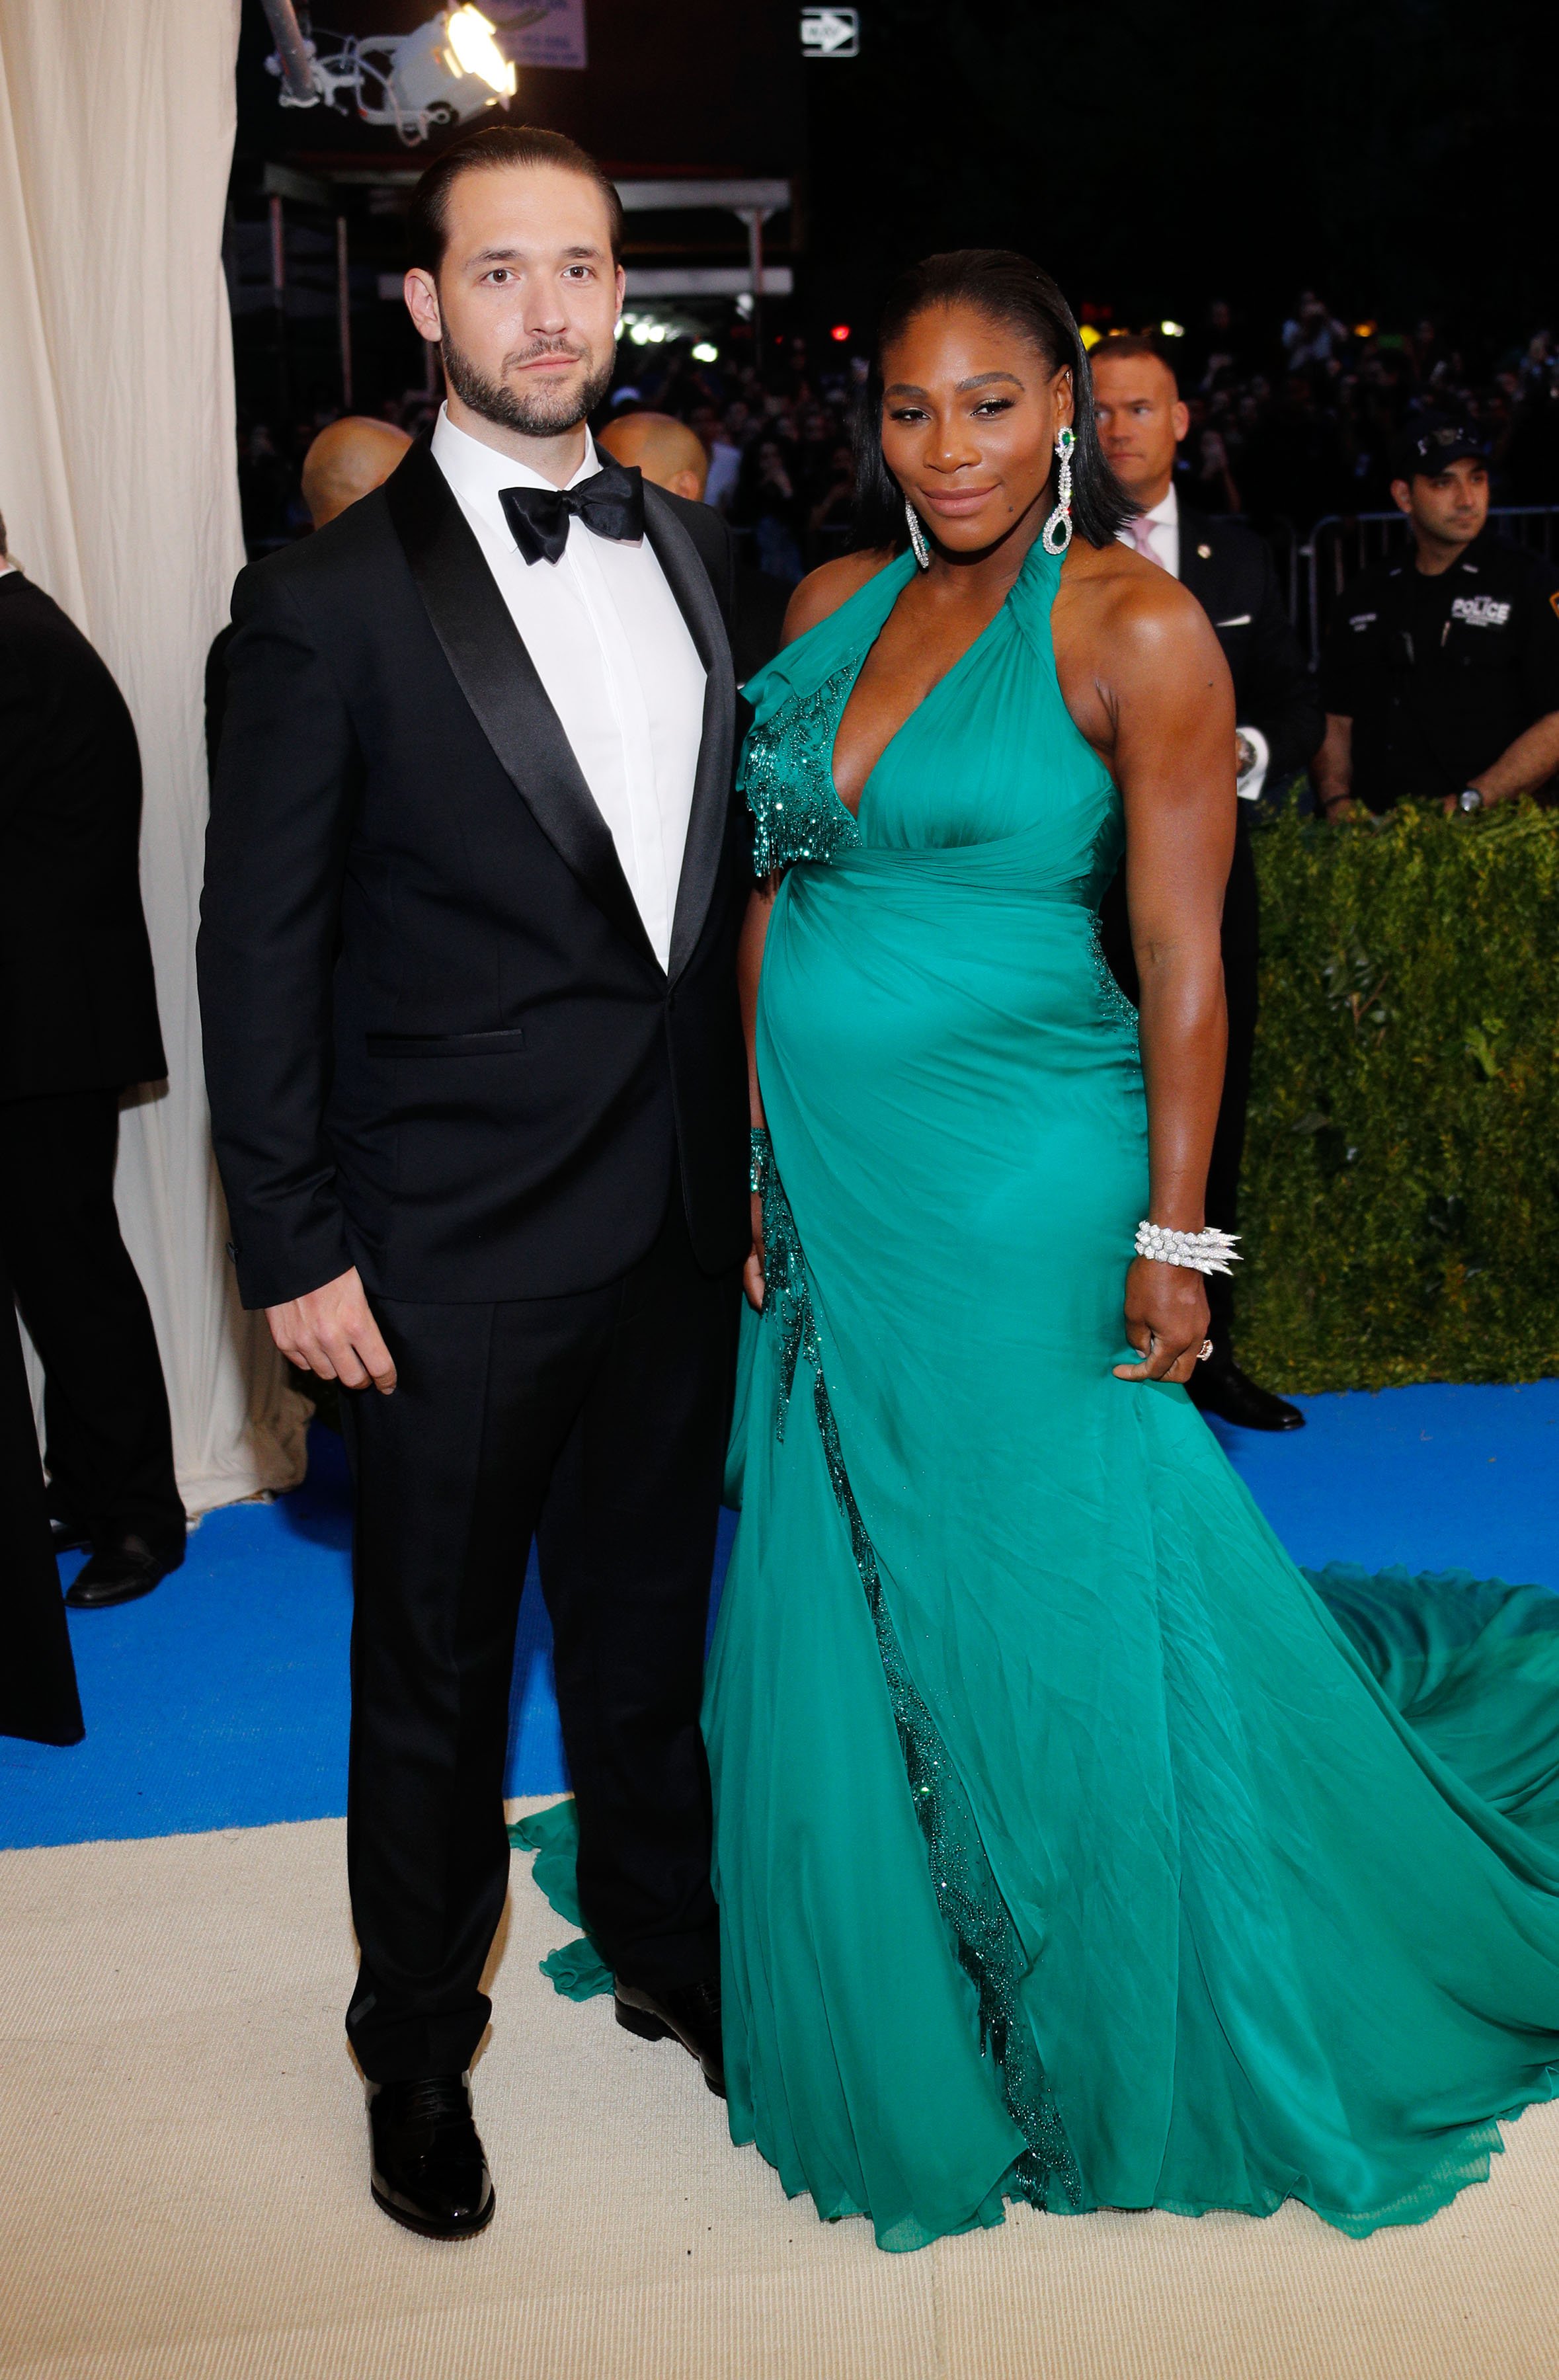 Alexis Ohanian and Serena Williams at "Rei Kawakubo/Comme des Garçons: Art of the In-Between" Costume Institute Gala on May 1, 2017, in New York City. | Source: Getty Images